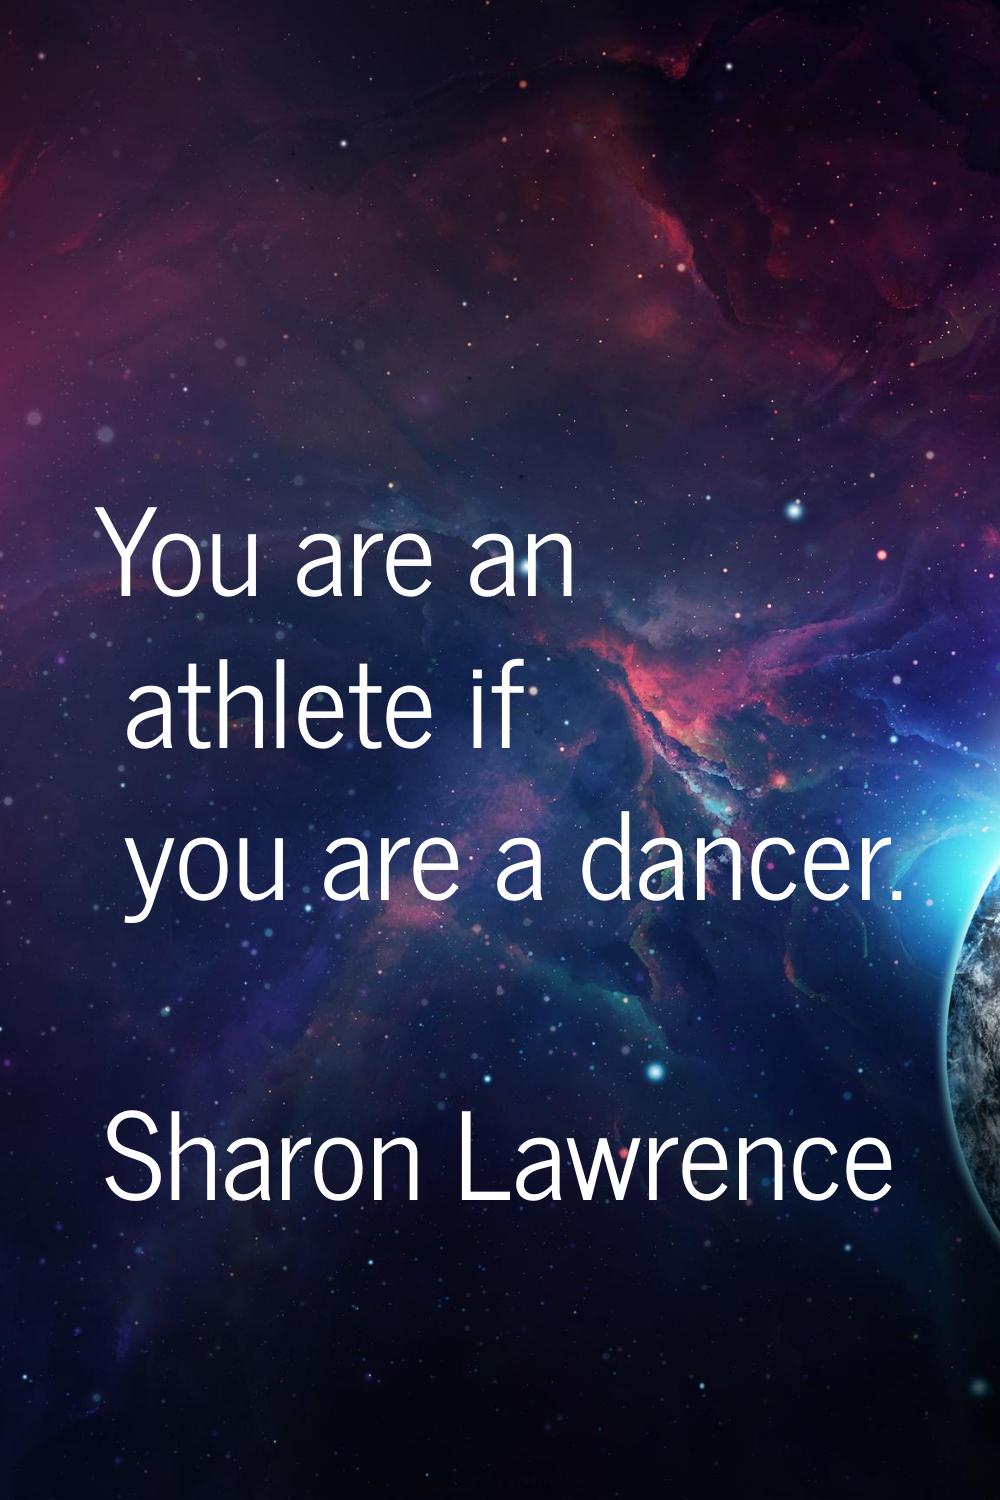 You are an athlete if you are a dancer.